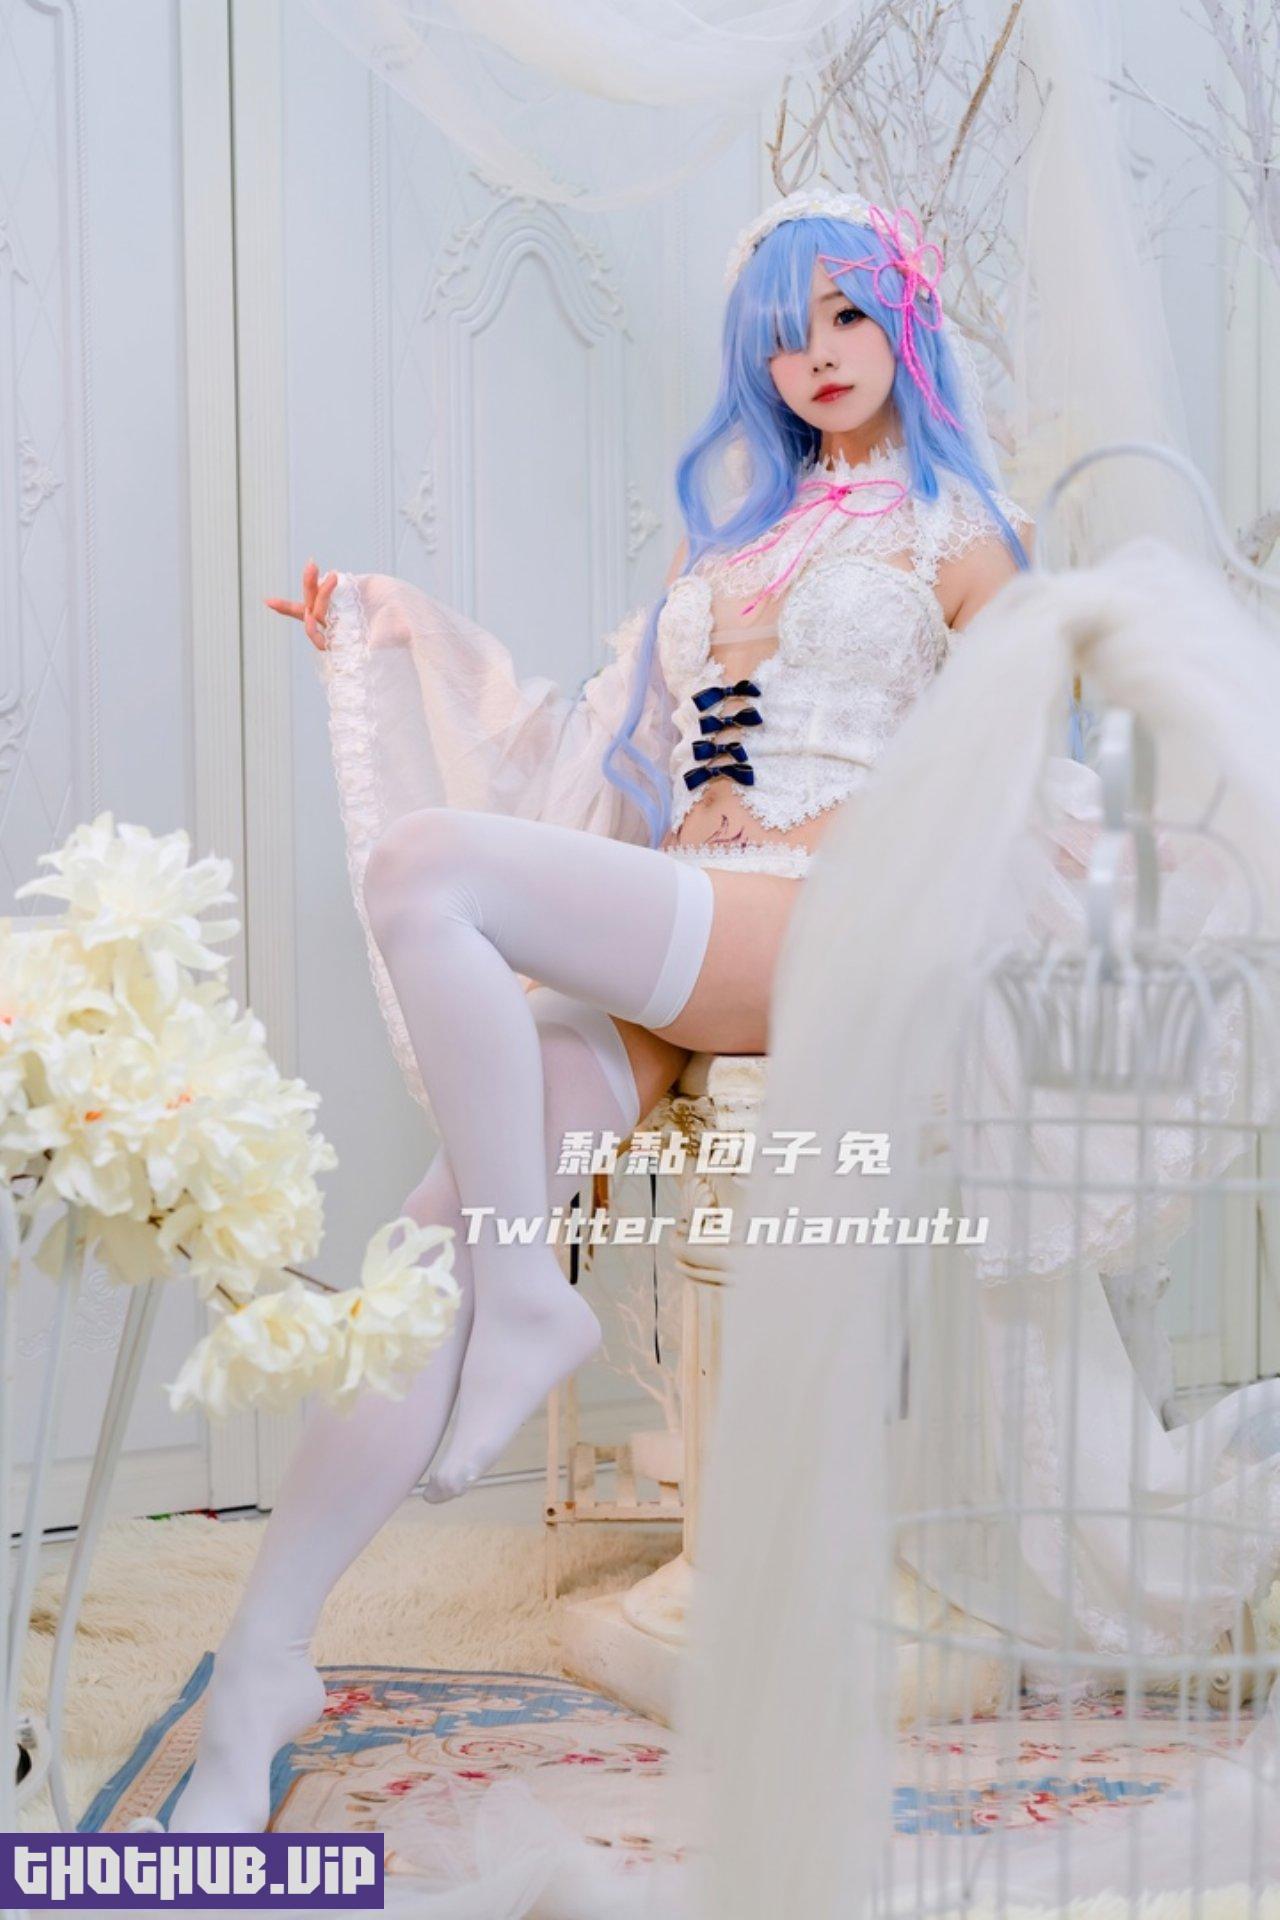 Rem ReZero %E9%BB%8F%E9%BB%8F%E5%9B%A2%E5%AD%90%E5%85%94 41 pictures leaked from Onlyfans Patreon